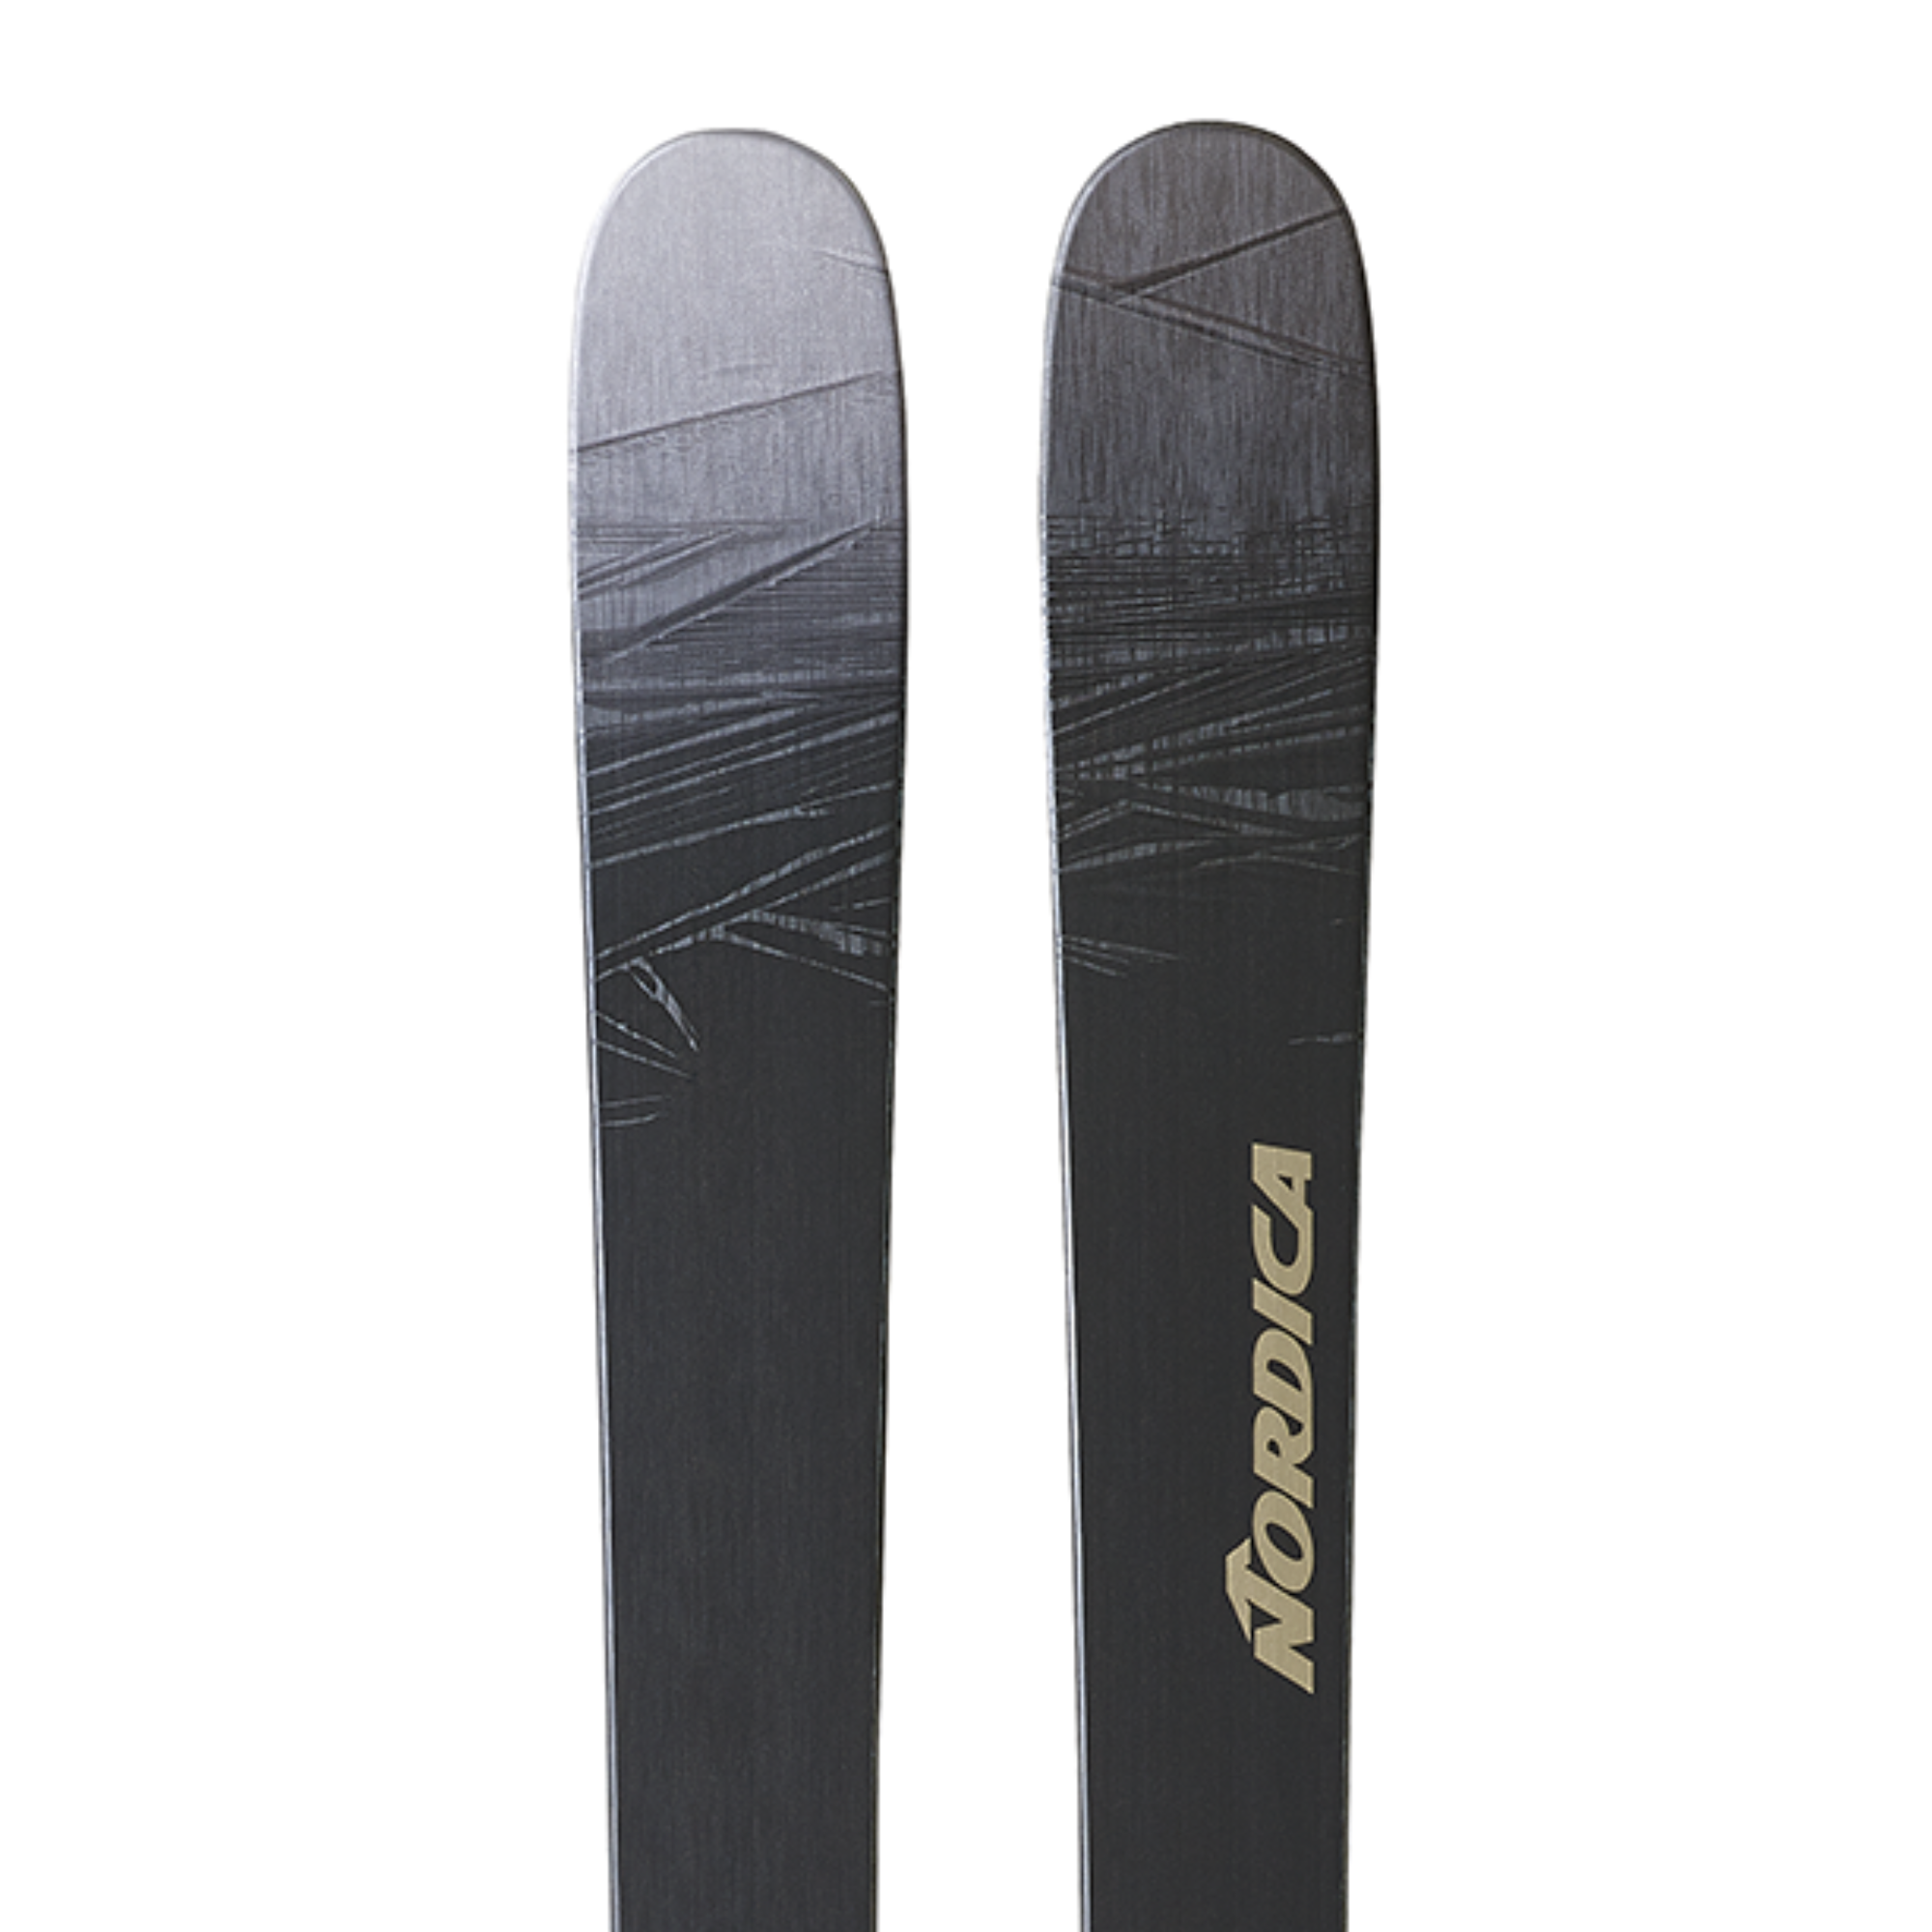 Nordica Unleashed 108 Skis (Ski Only)